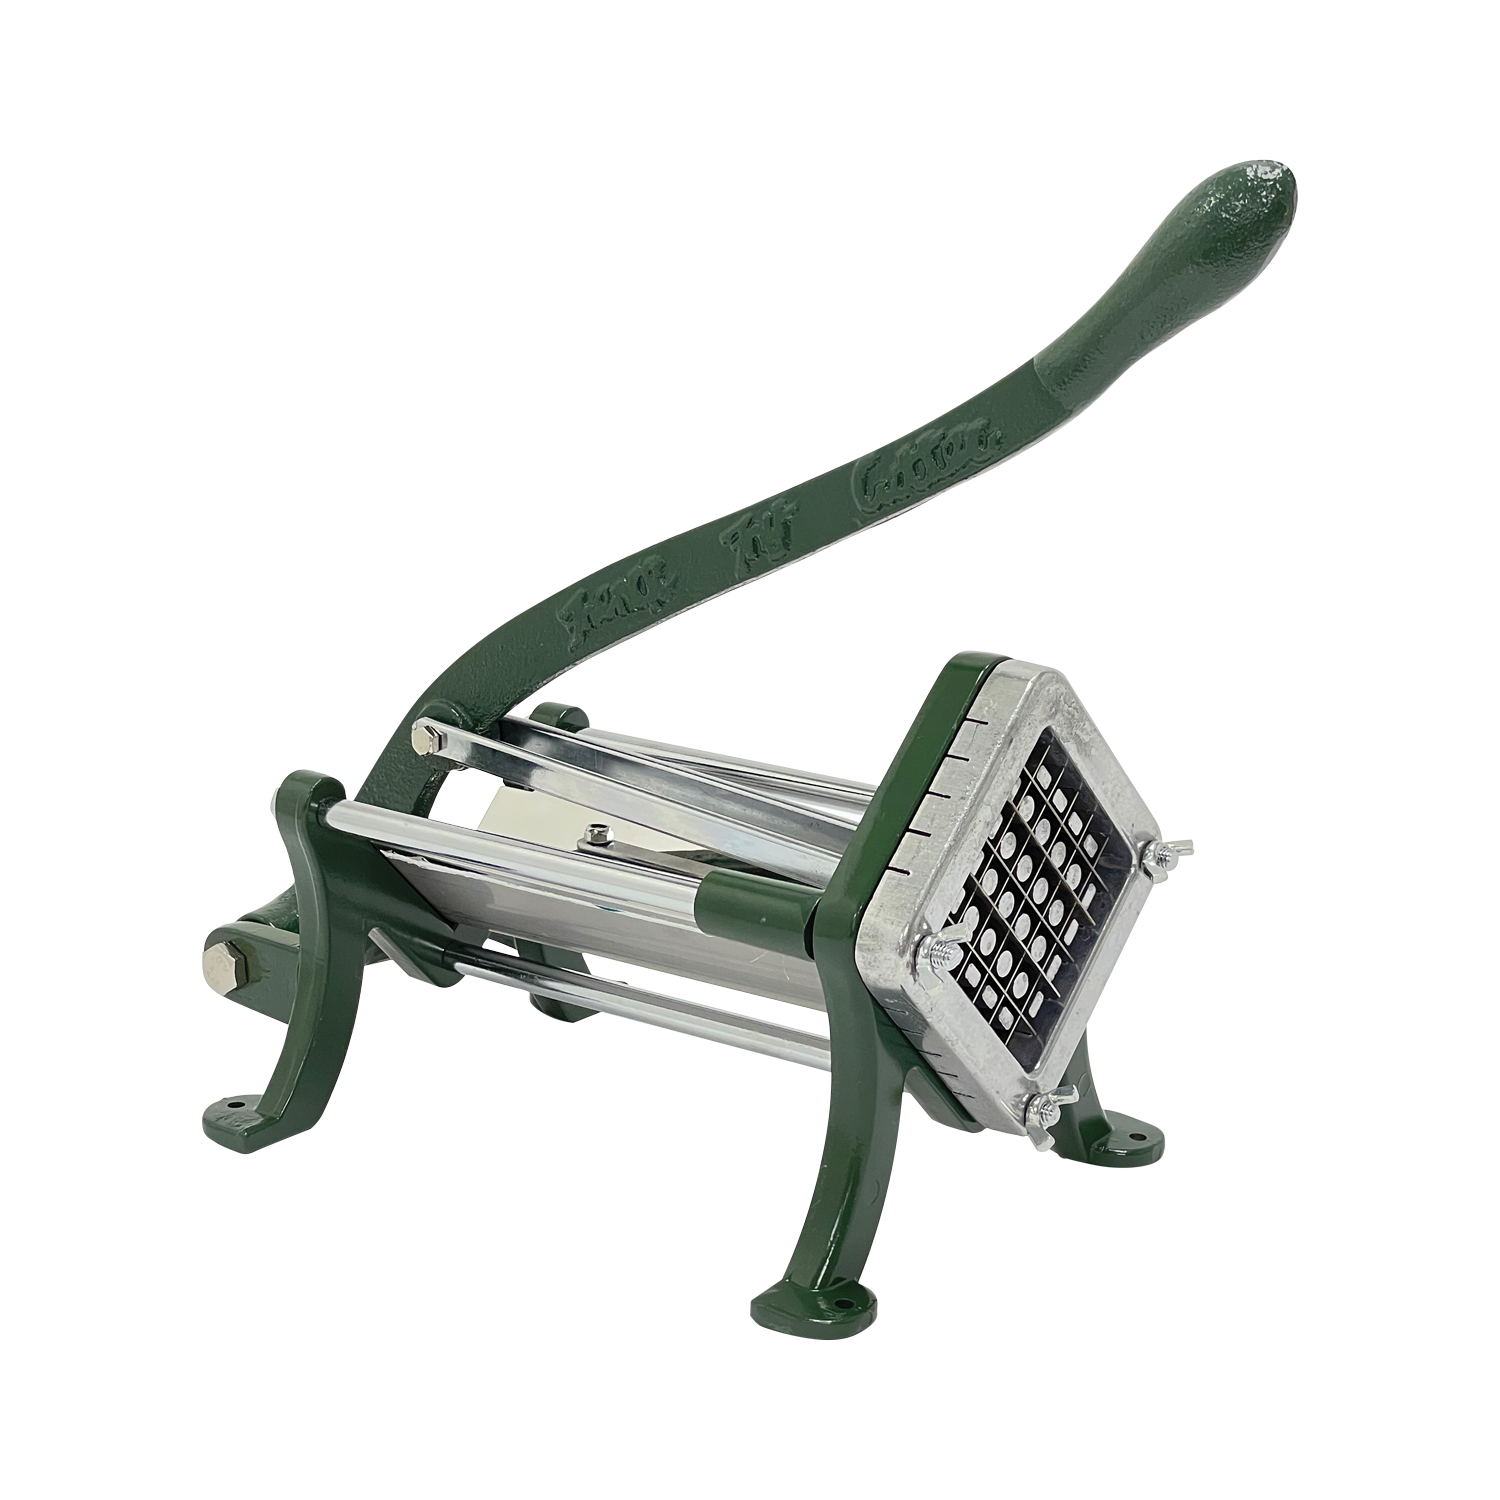 CAC China FPFC-500 French Fry Cutter 1/2"